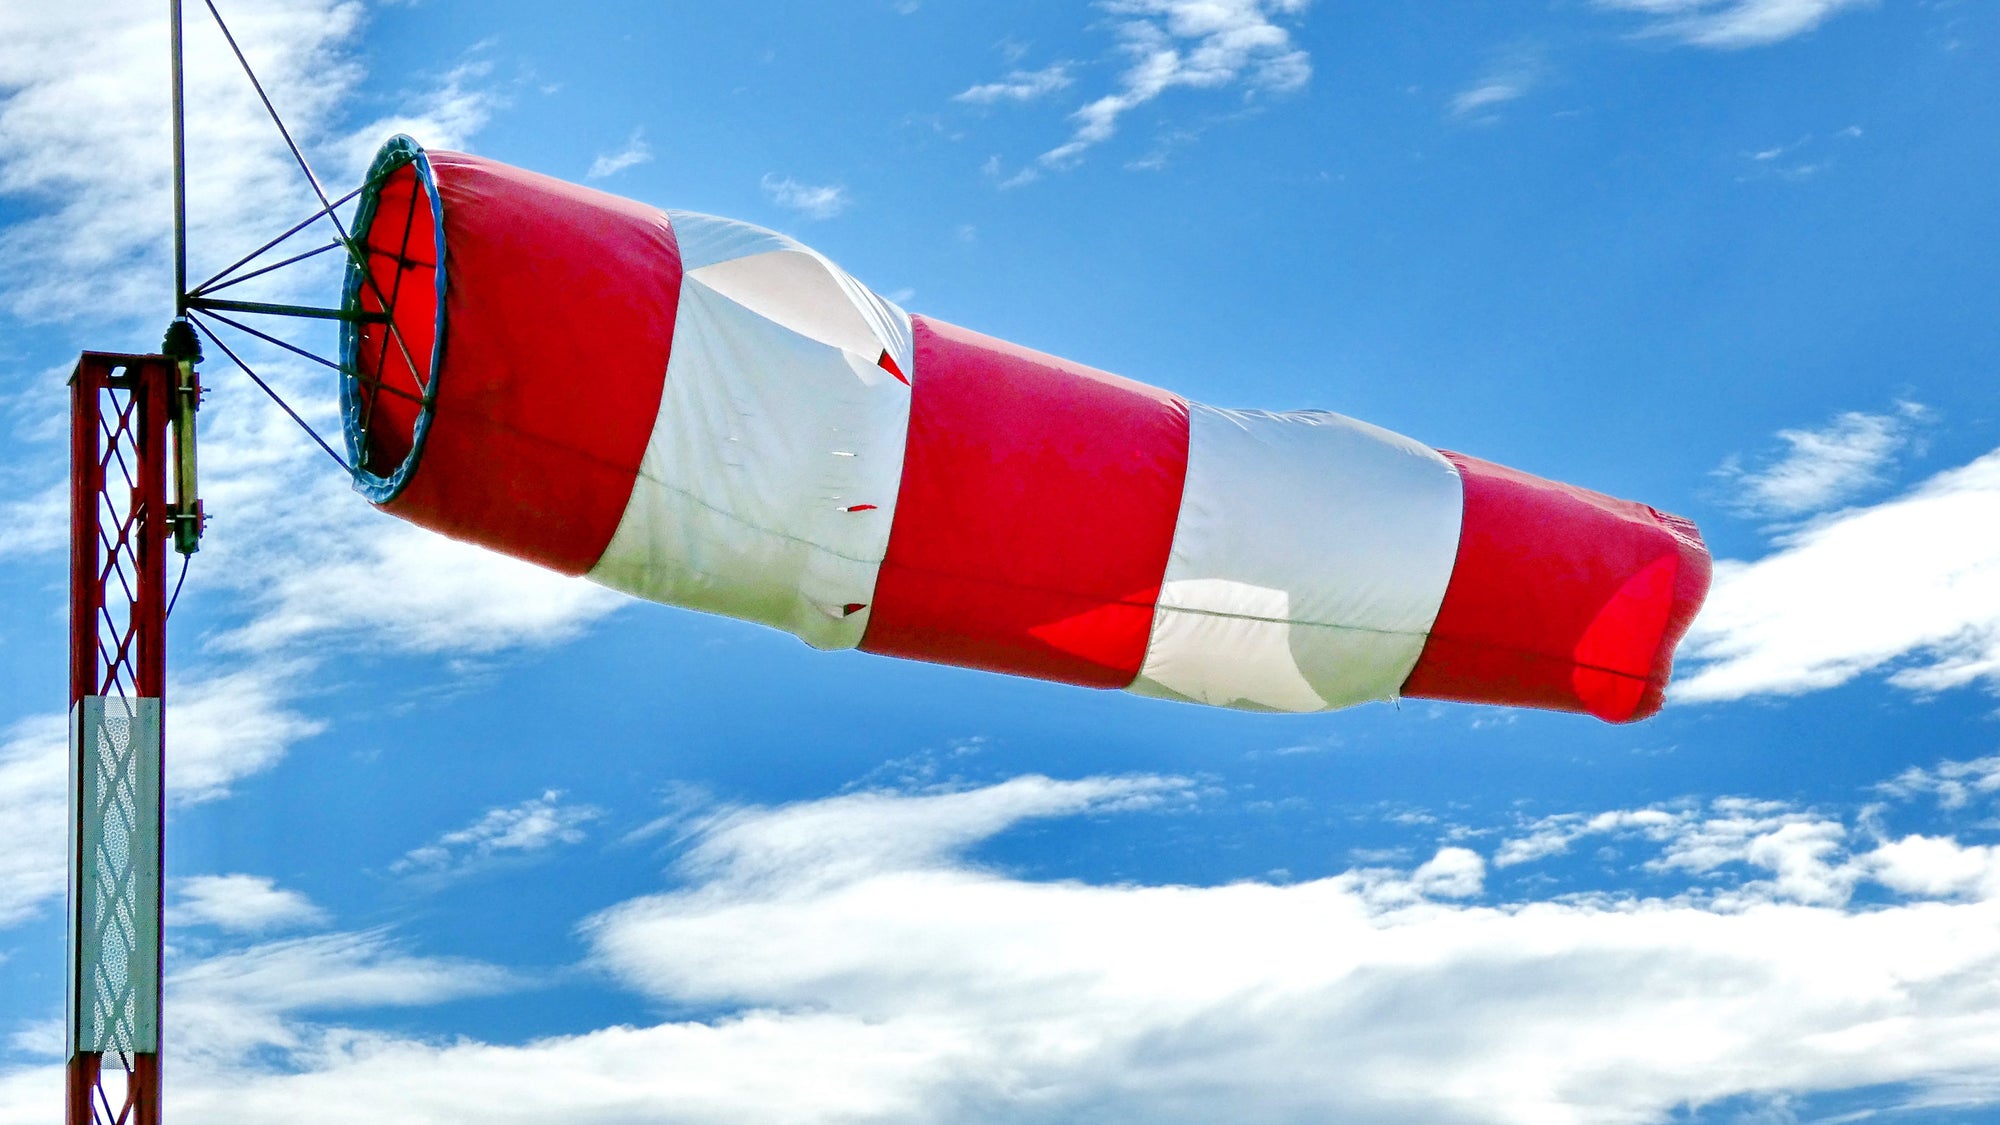 6 Ways to Care for your Windsock and Prevent Deterioration - The Custom Windsock Co.